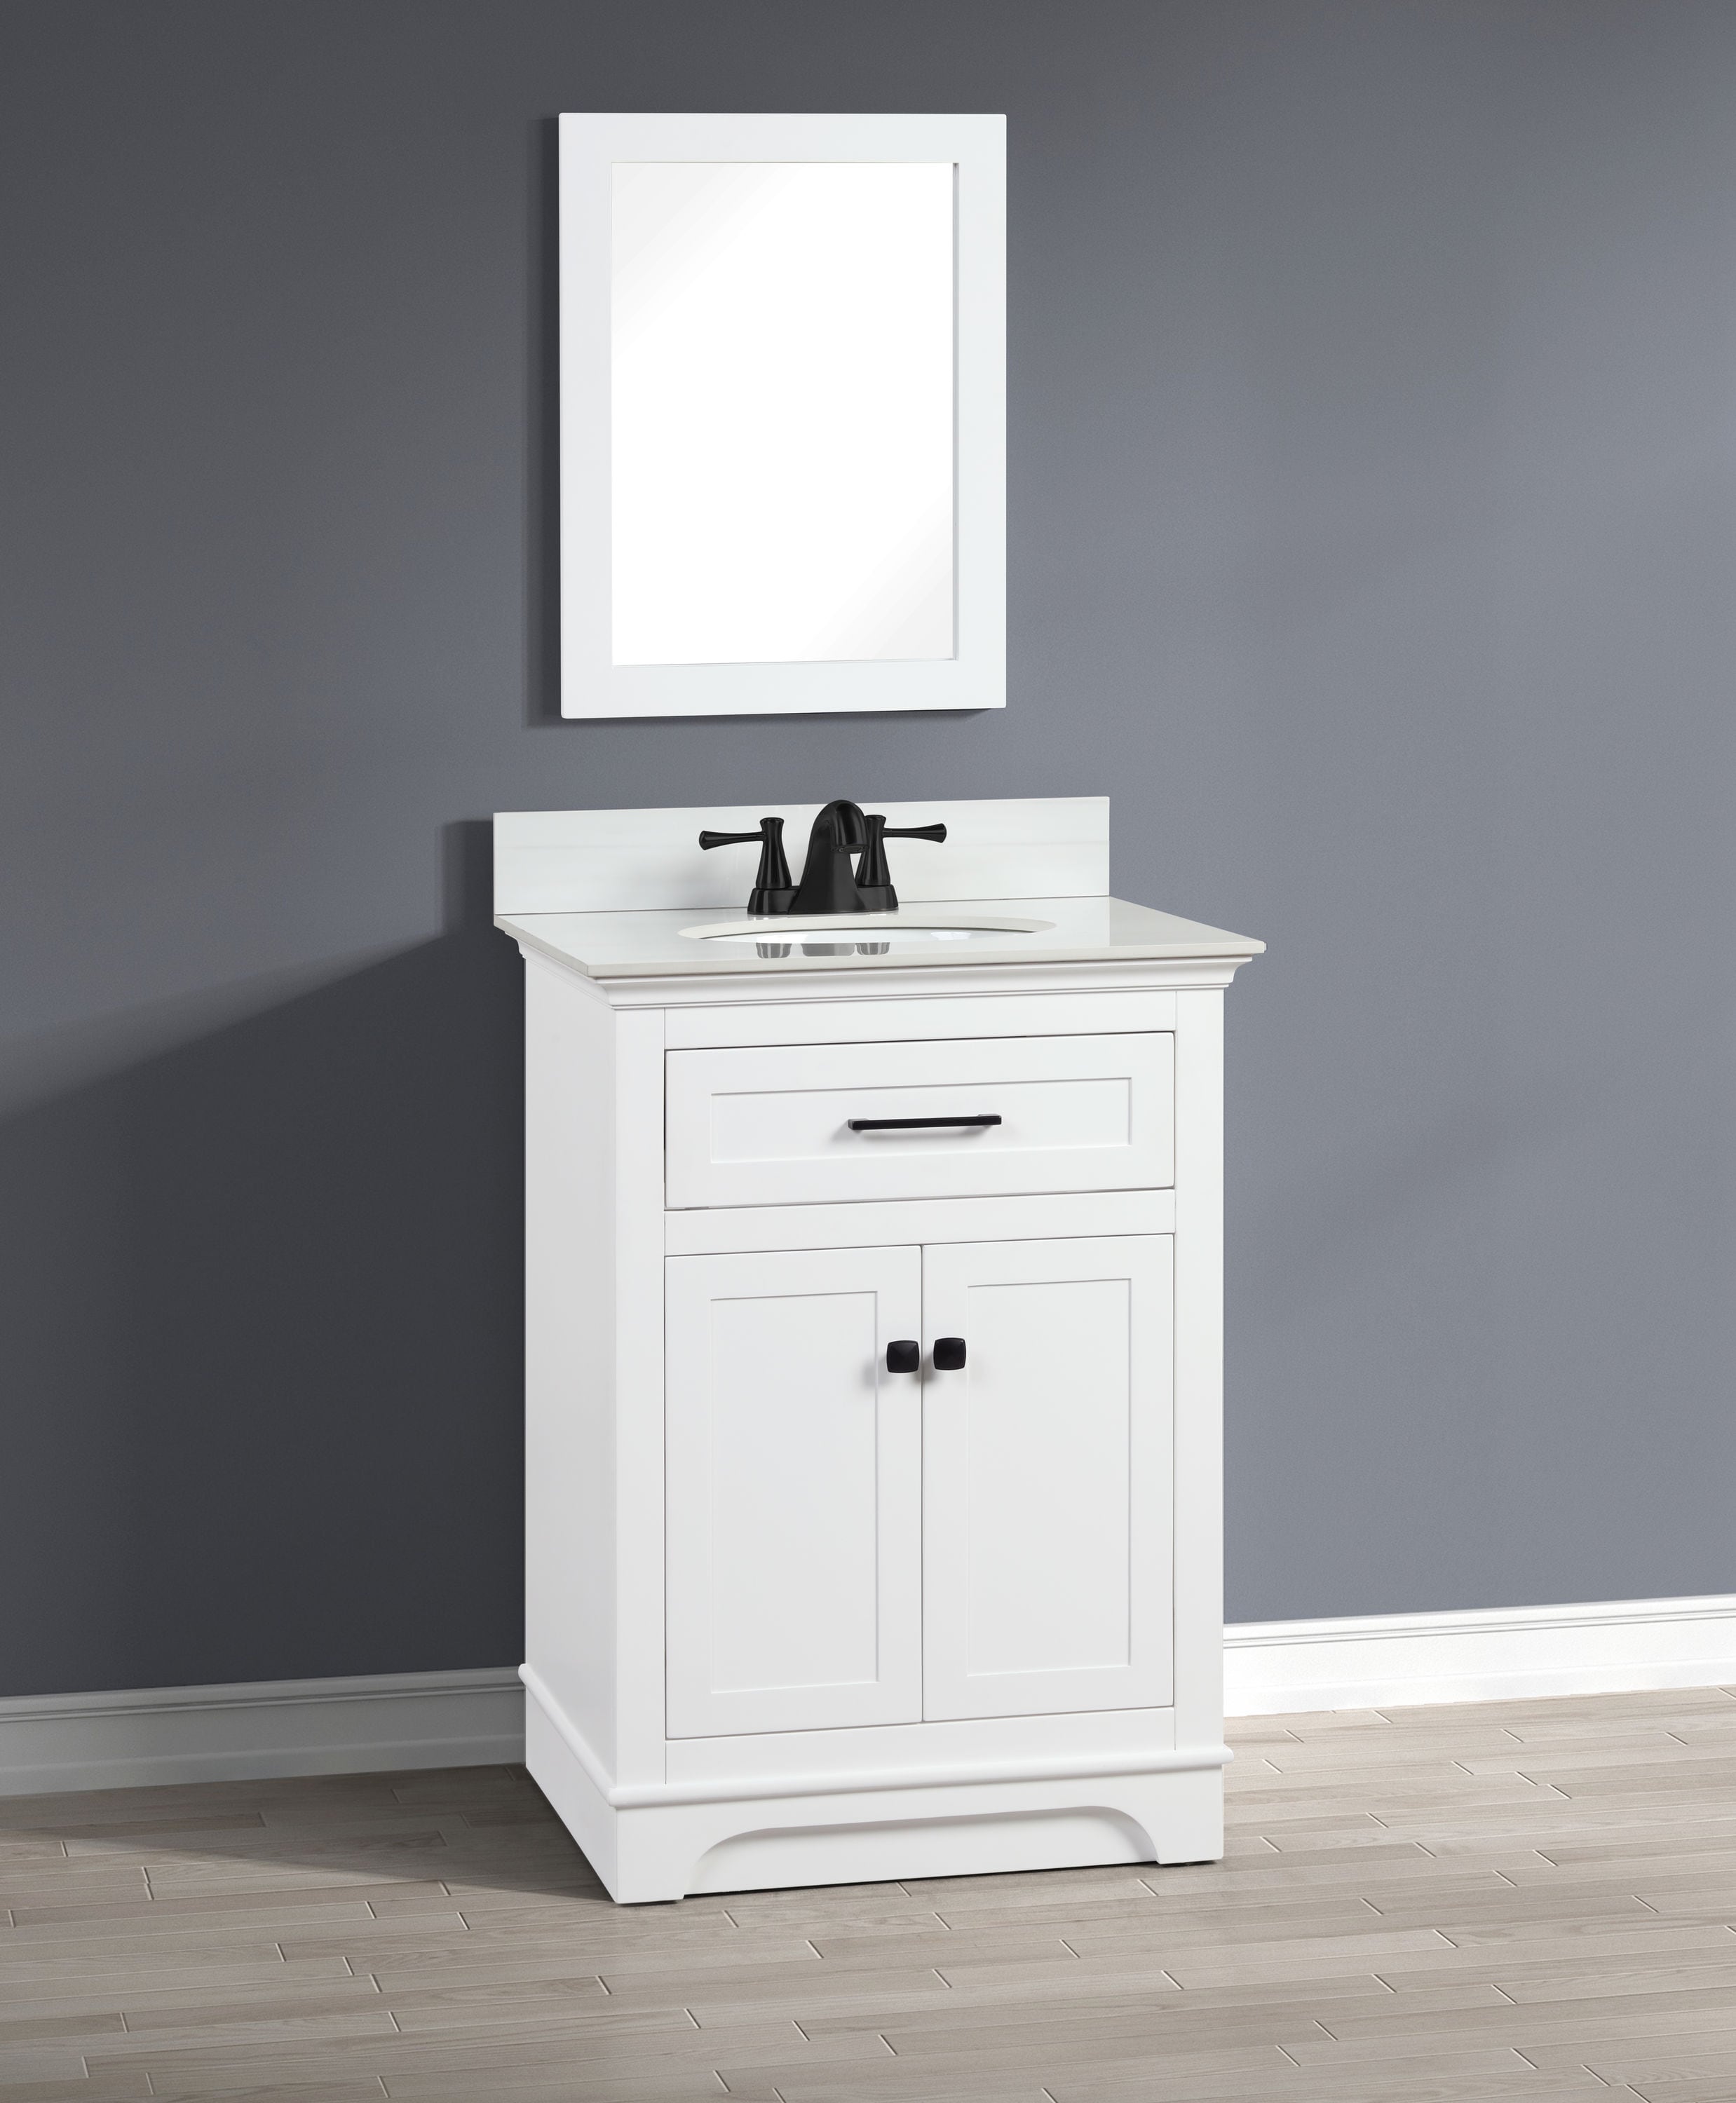 Style Selections Linden 24-in White Bathroom Vanity Dolomiti Bianco Sintered Stone Top with Undermount Sink & Mirror $229 at Select Lowe's locations